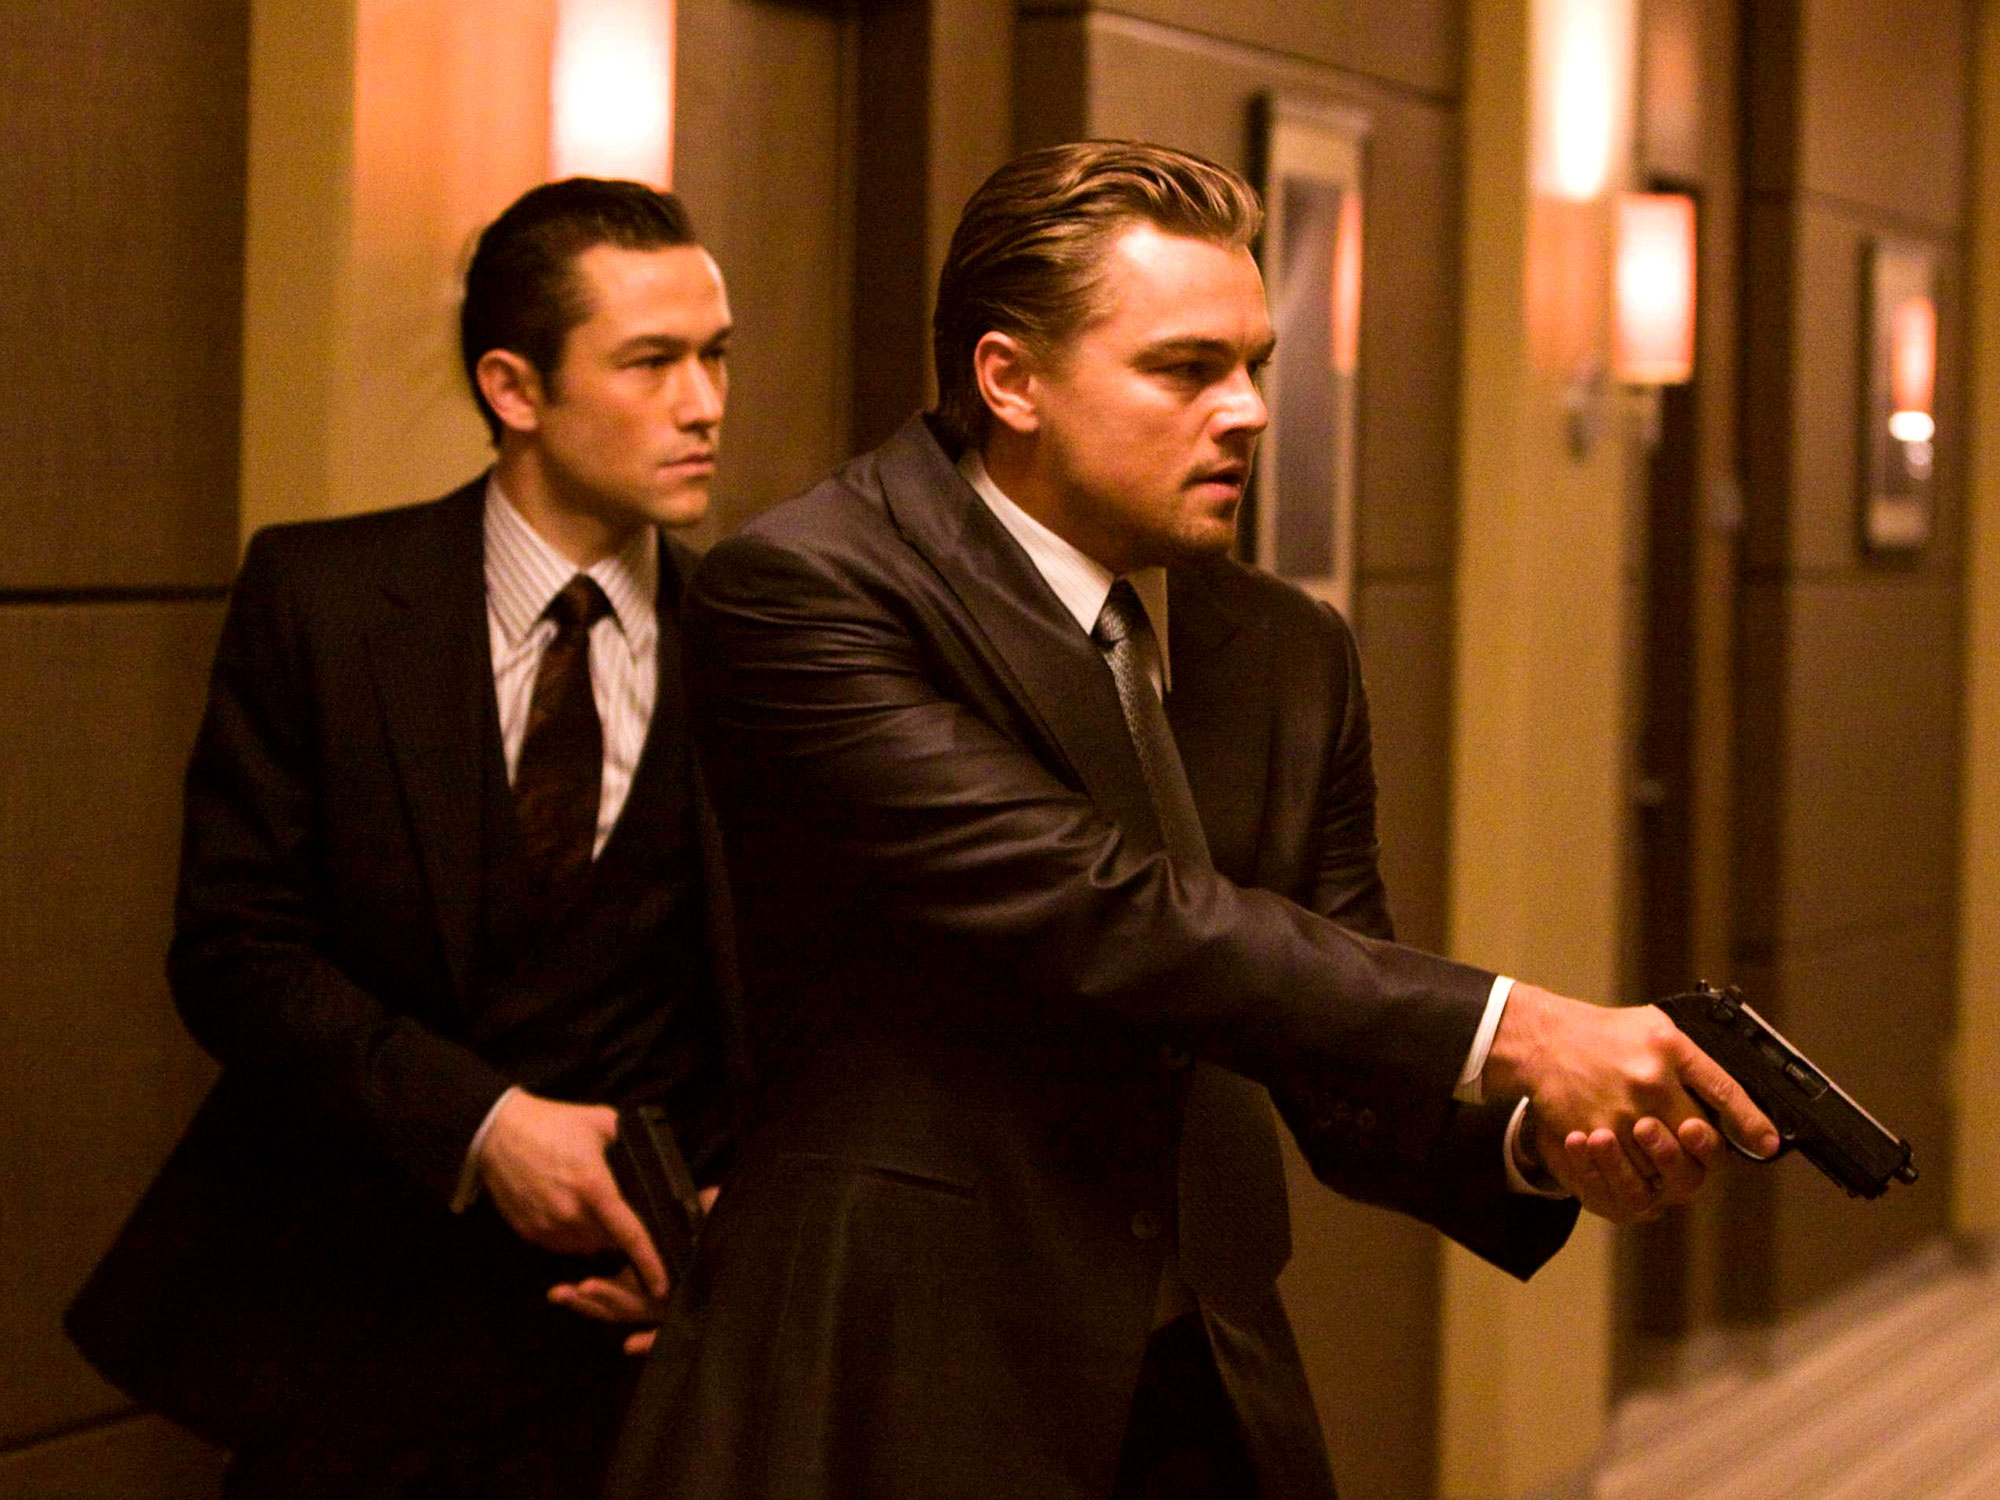 movie review of inception